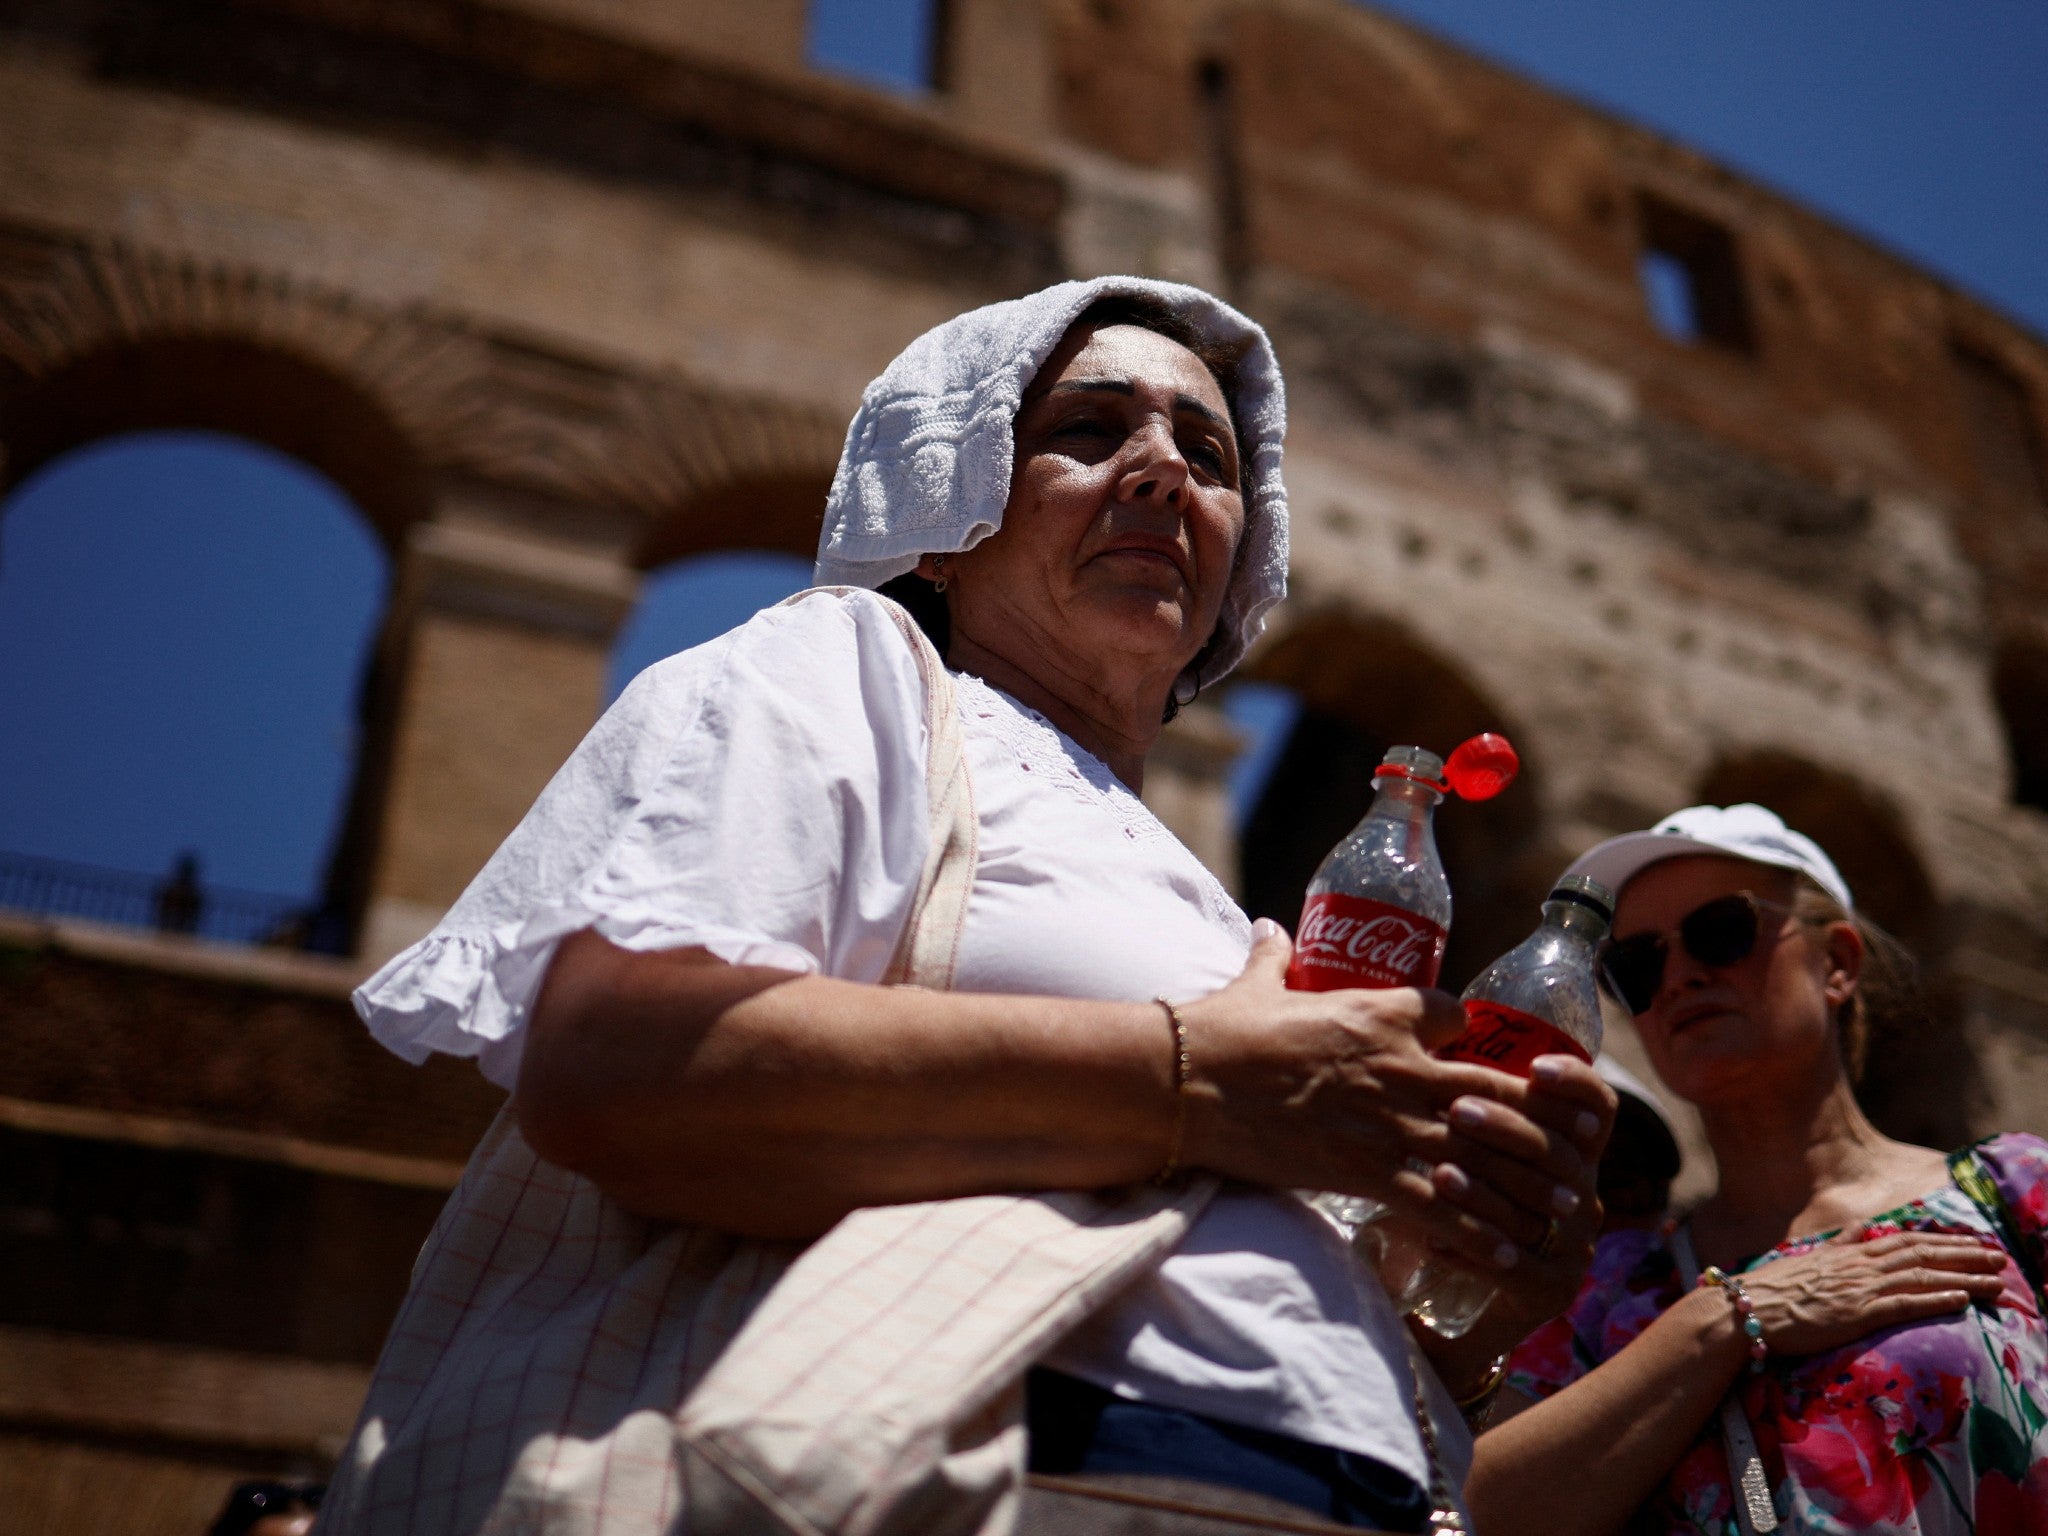 A woman tries to shelter from the heat near the Colosseum in Rome